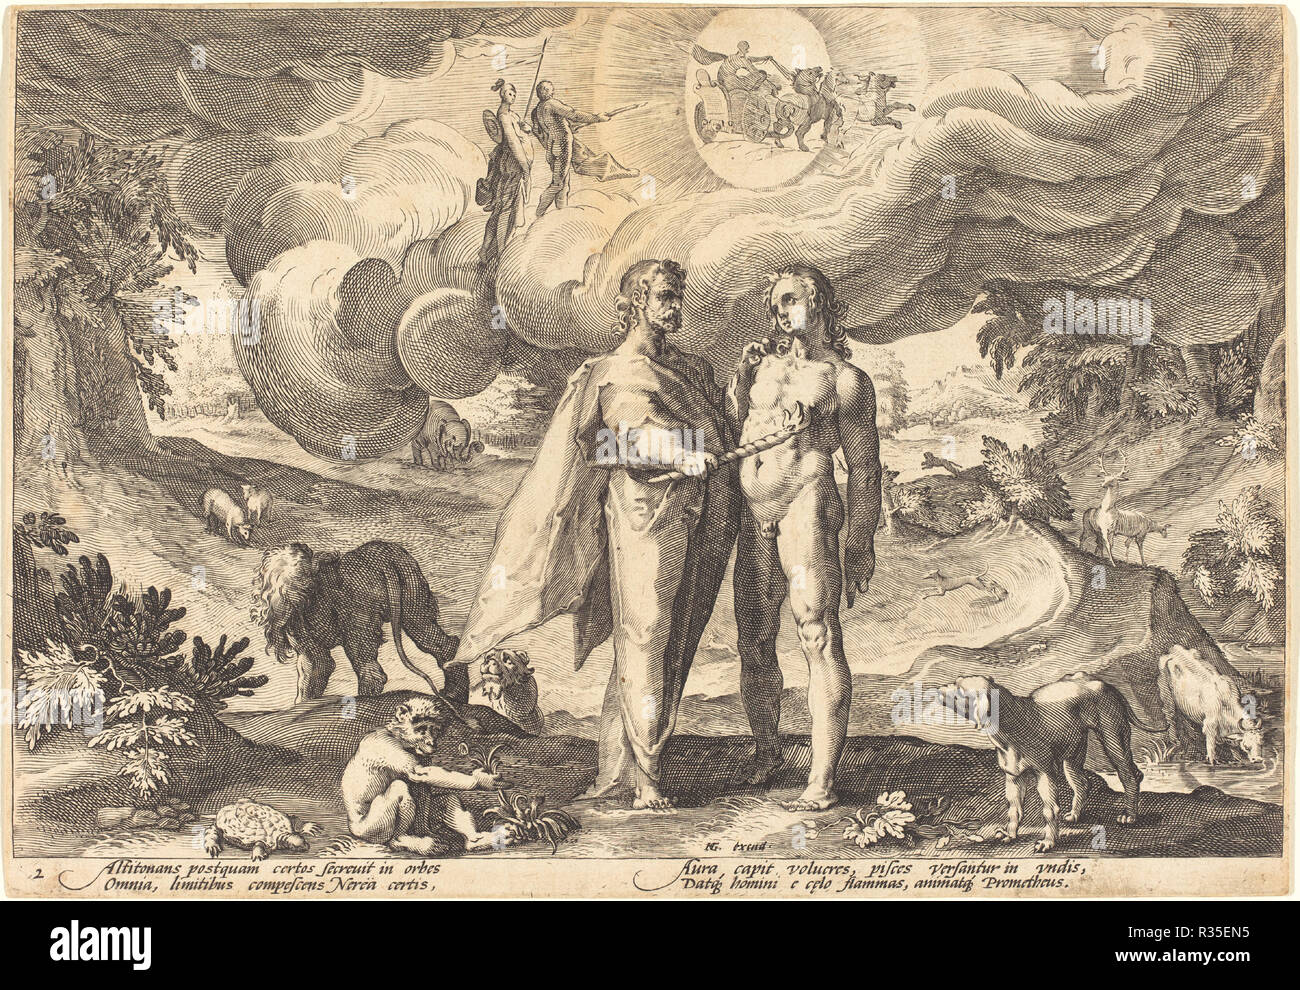 Prometheus Making Man and Animating Him with Fire from Heaven. Dimensions: plate: 17.5 x 25.1 cm (6 7/8 x 9 7/8 in.). Medium: engraving on laid paper. Museum: National Gallery of Art, Washington DC. Author: Workshop of Hendrick Goltzius, after Hendrick Goltzius. Stock Photo